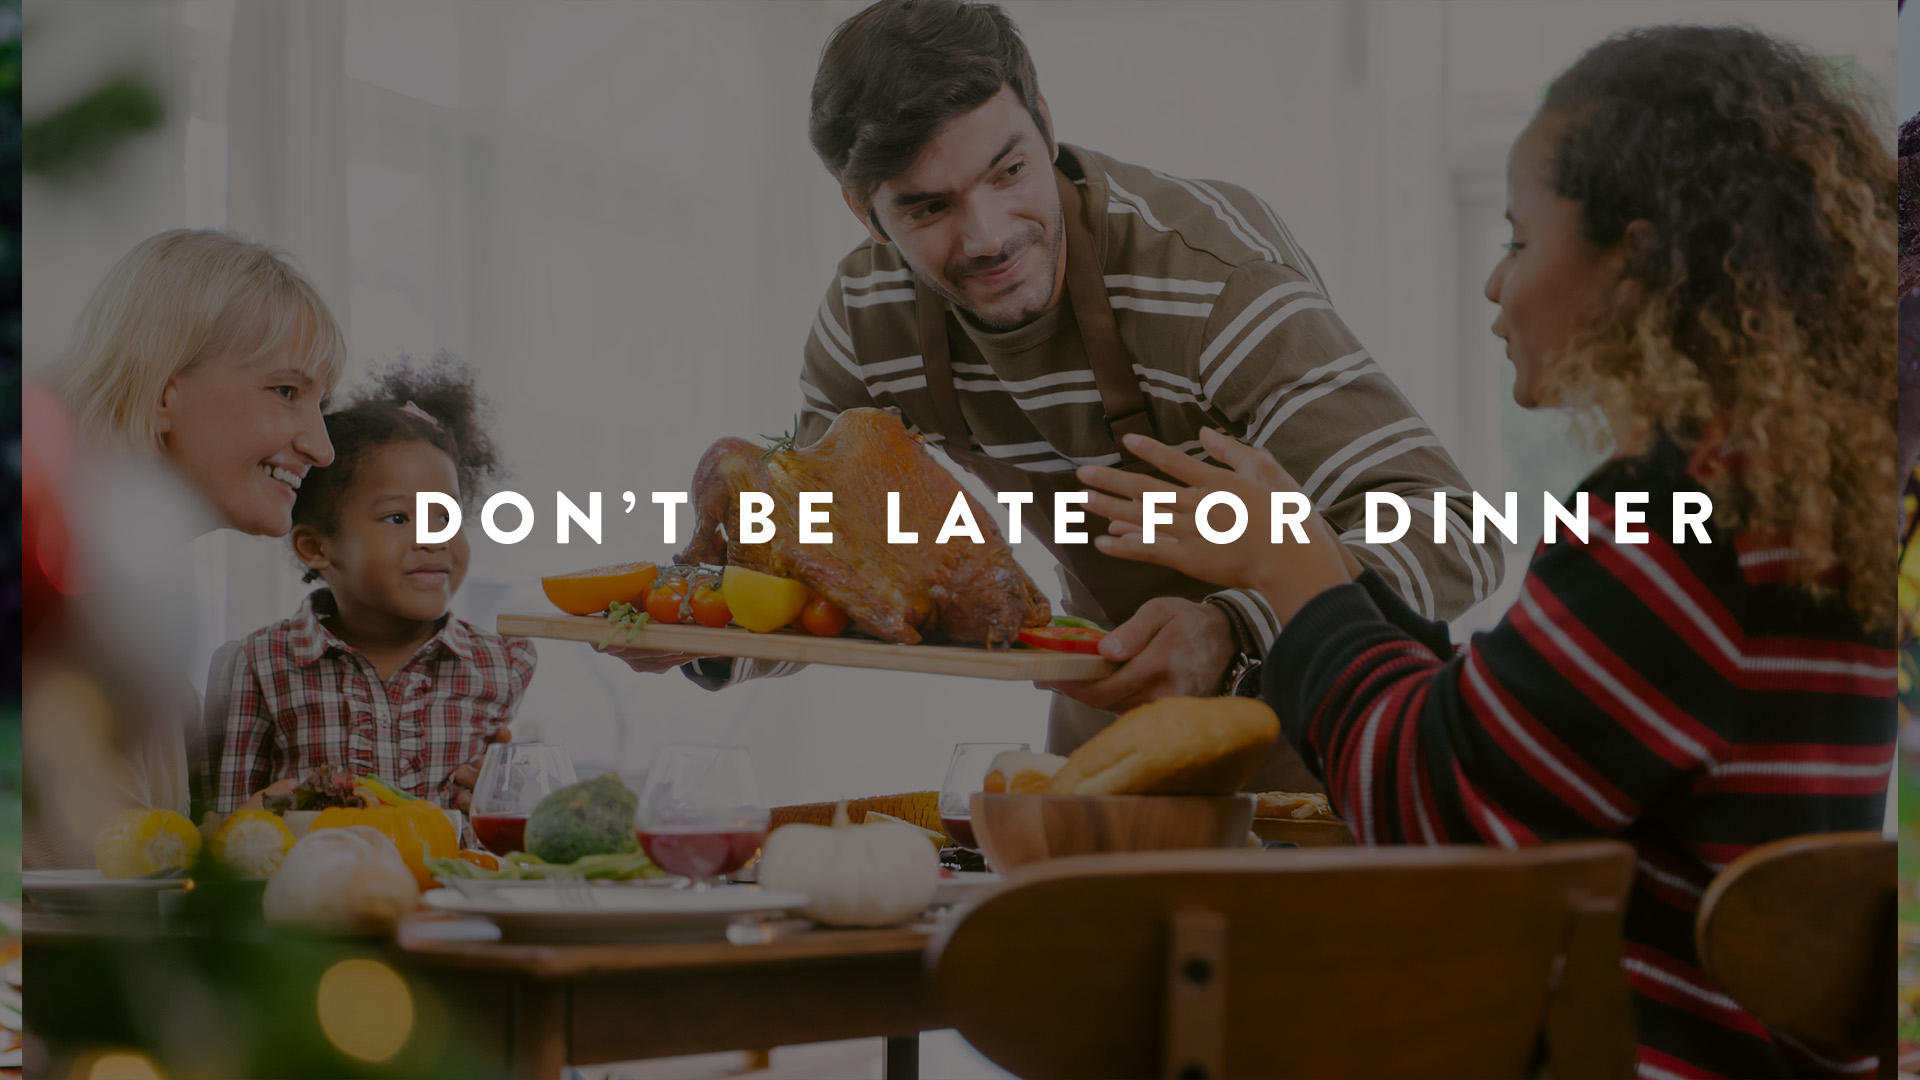 Don't be late for dinner